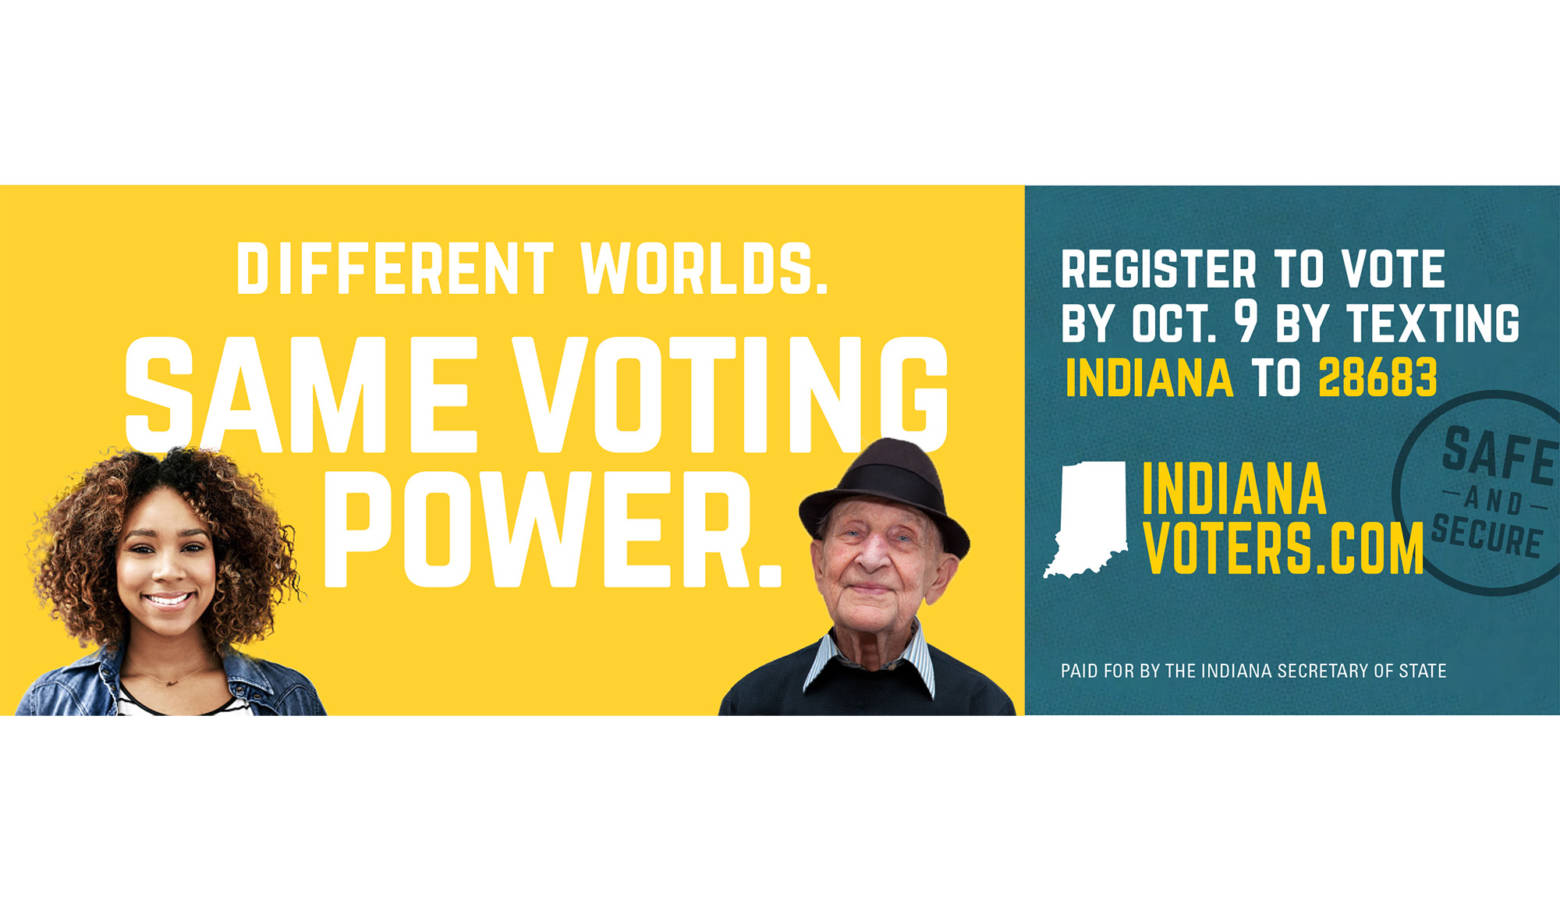 The campaign from the Indiana Secretary of State uses television, radio, and print ads to urge people to register to vote by the state’s Oct. 9 deadline. (Indiana Secretary of State's office)